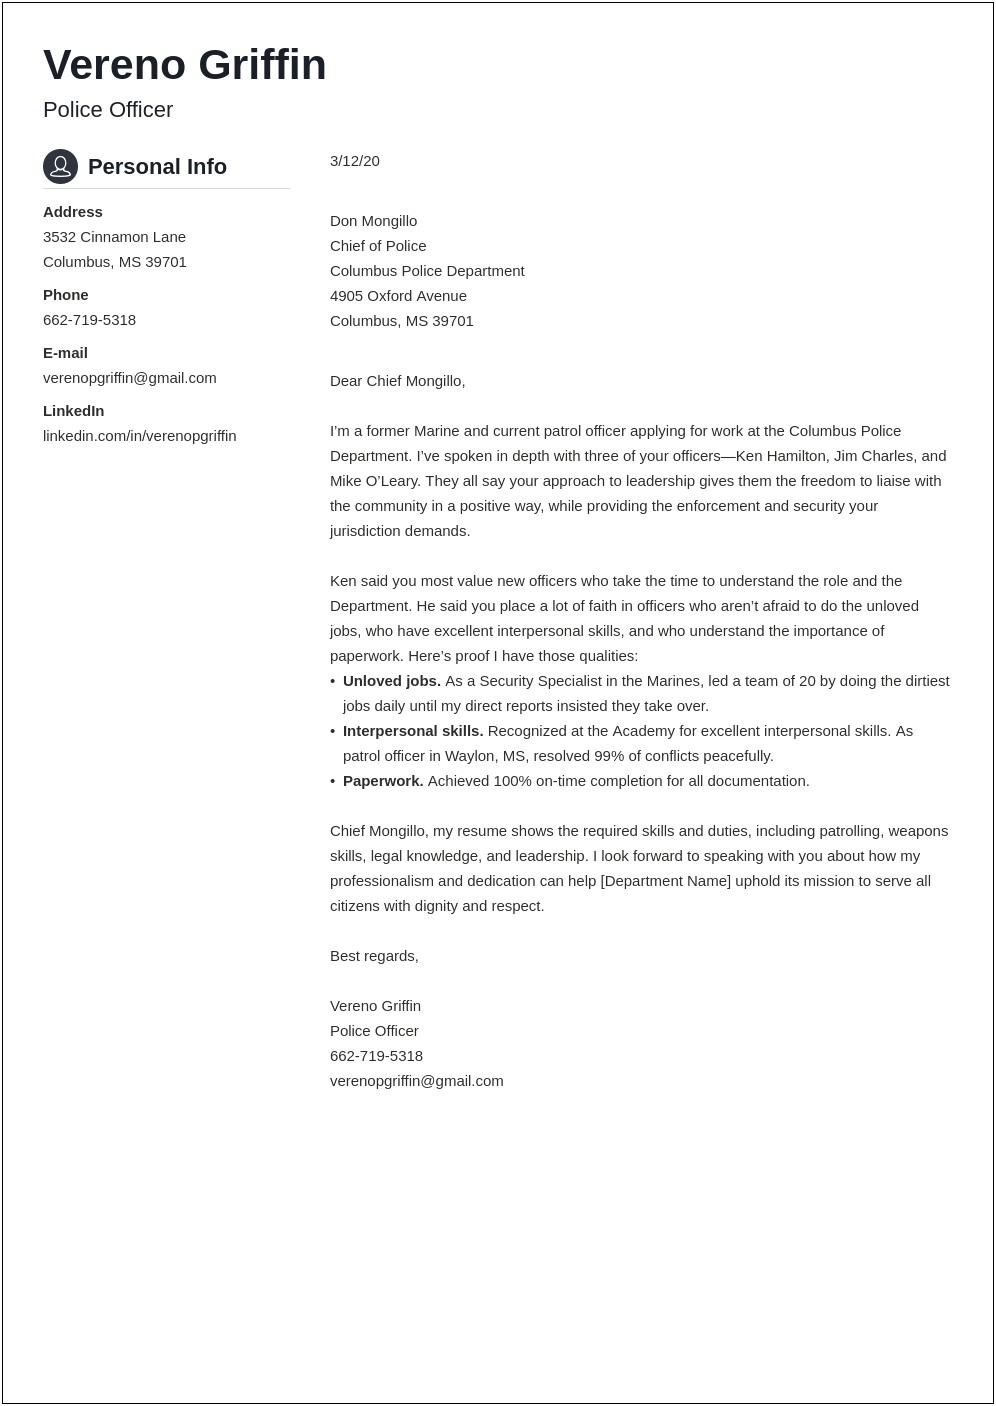 Resume Cover Letter Examples For Police Officers